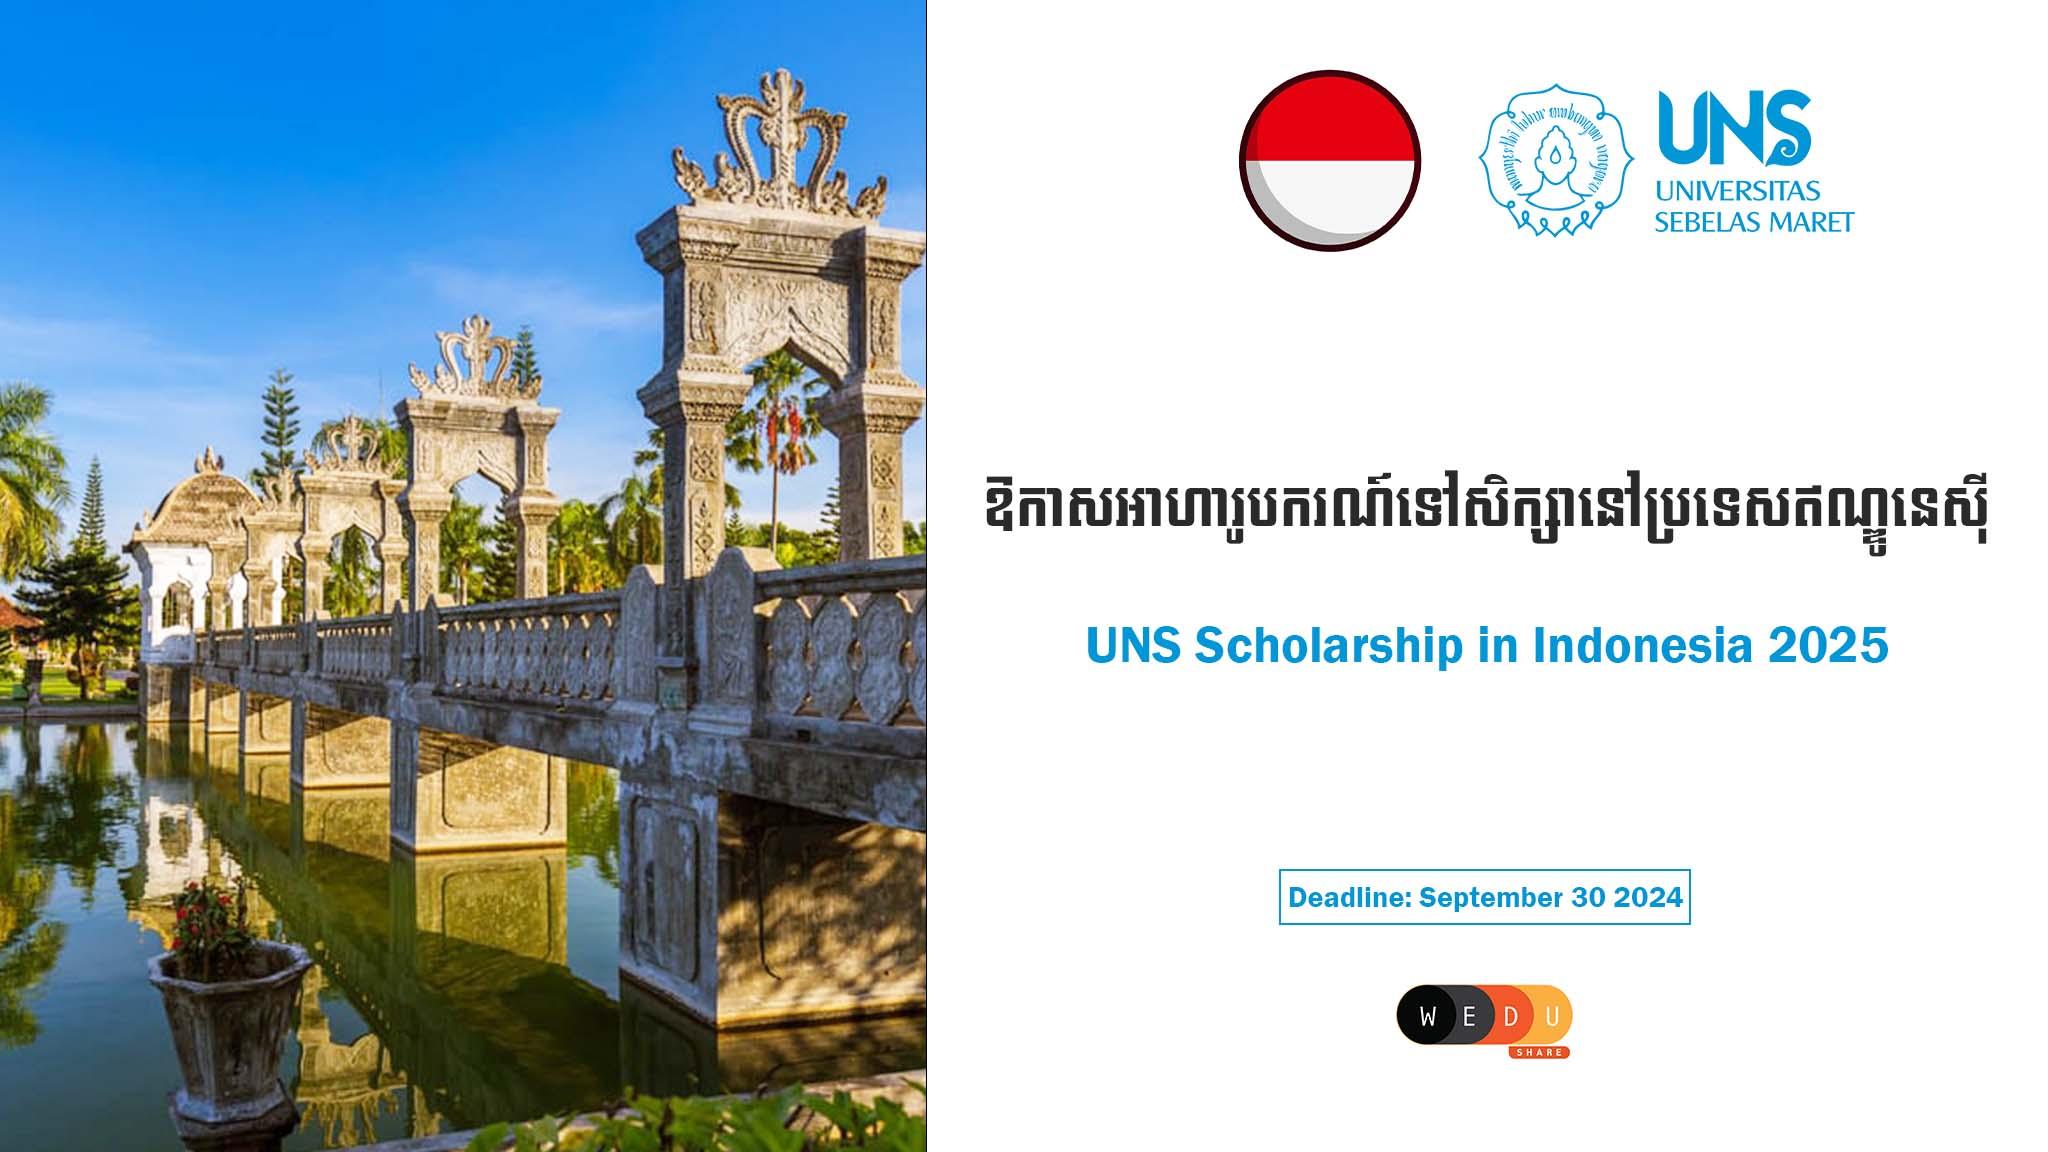 UNS Scholarship in Indonesia 2025